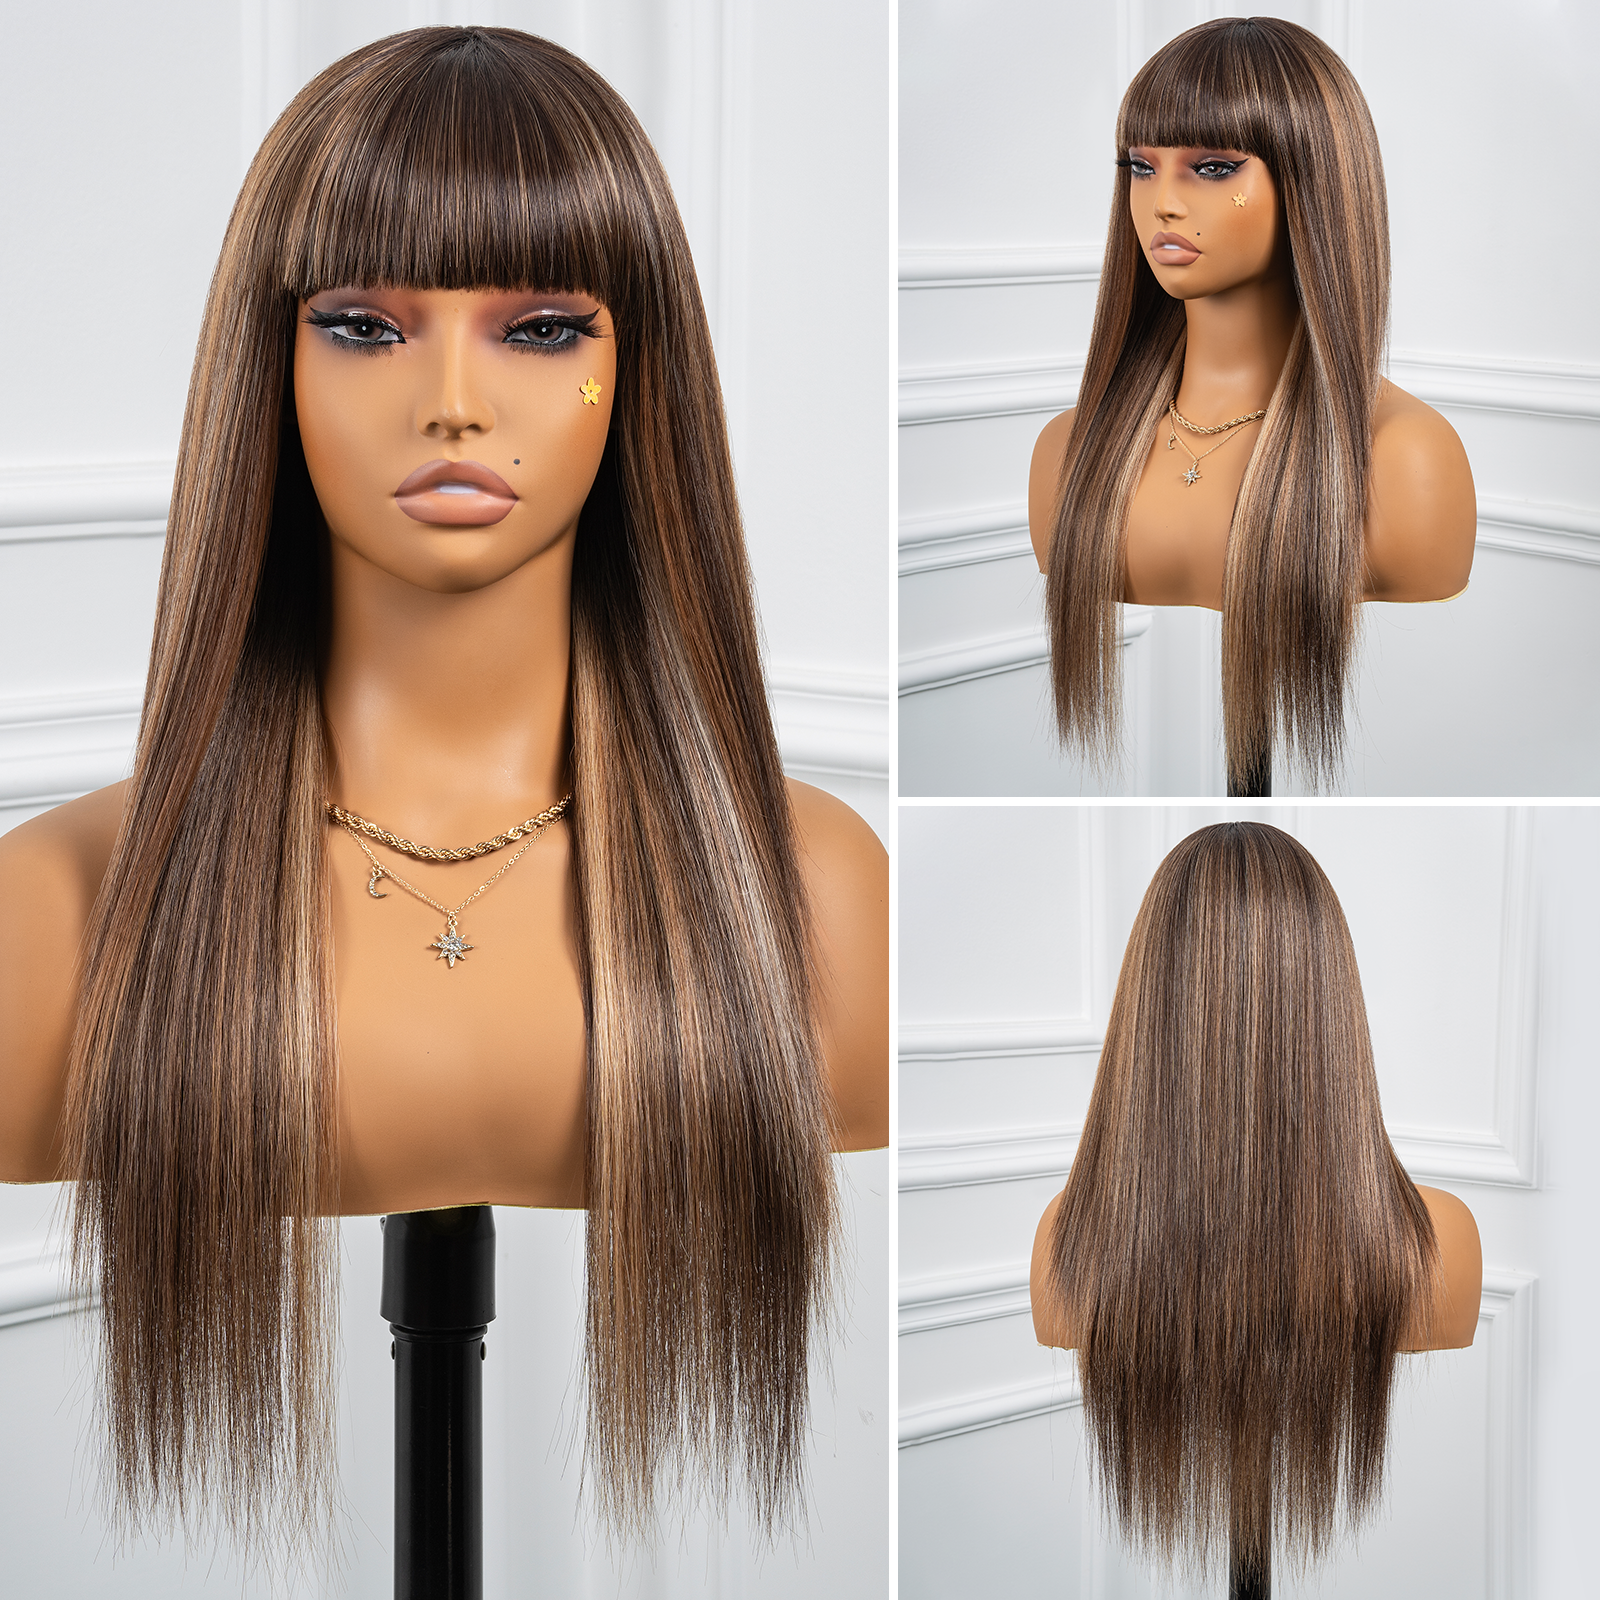 Toyotress Airy Long Straight Black Wig with Bangs | 24-26